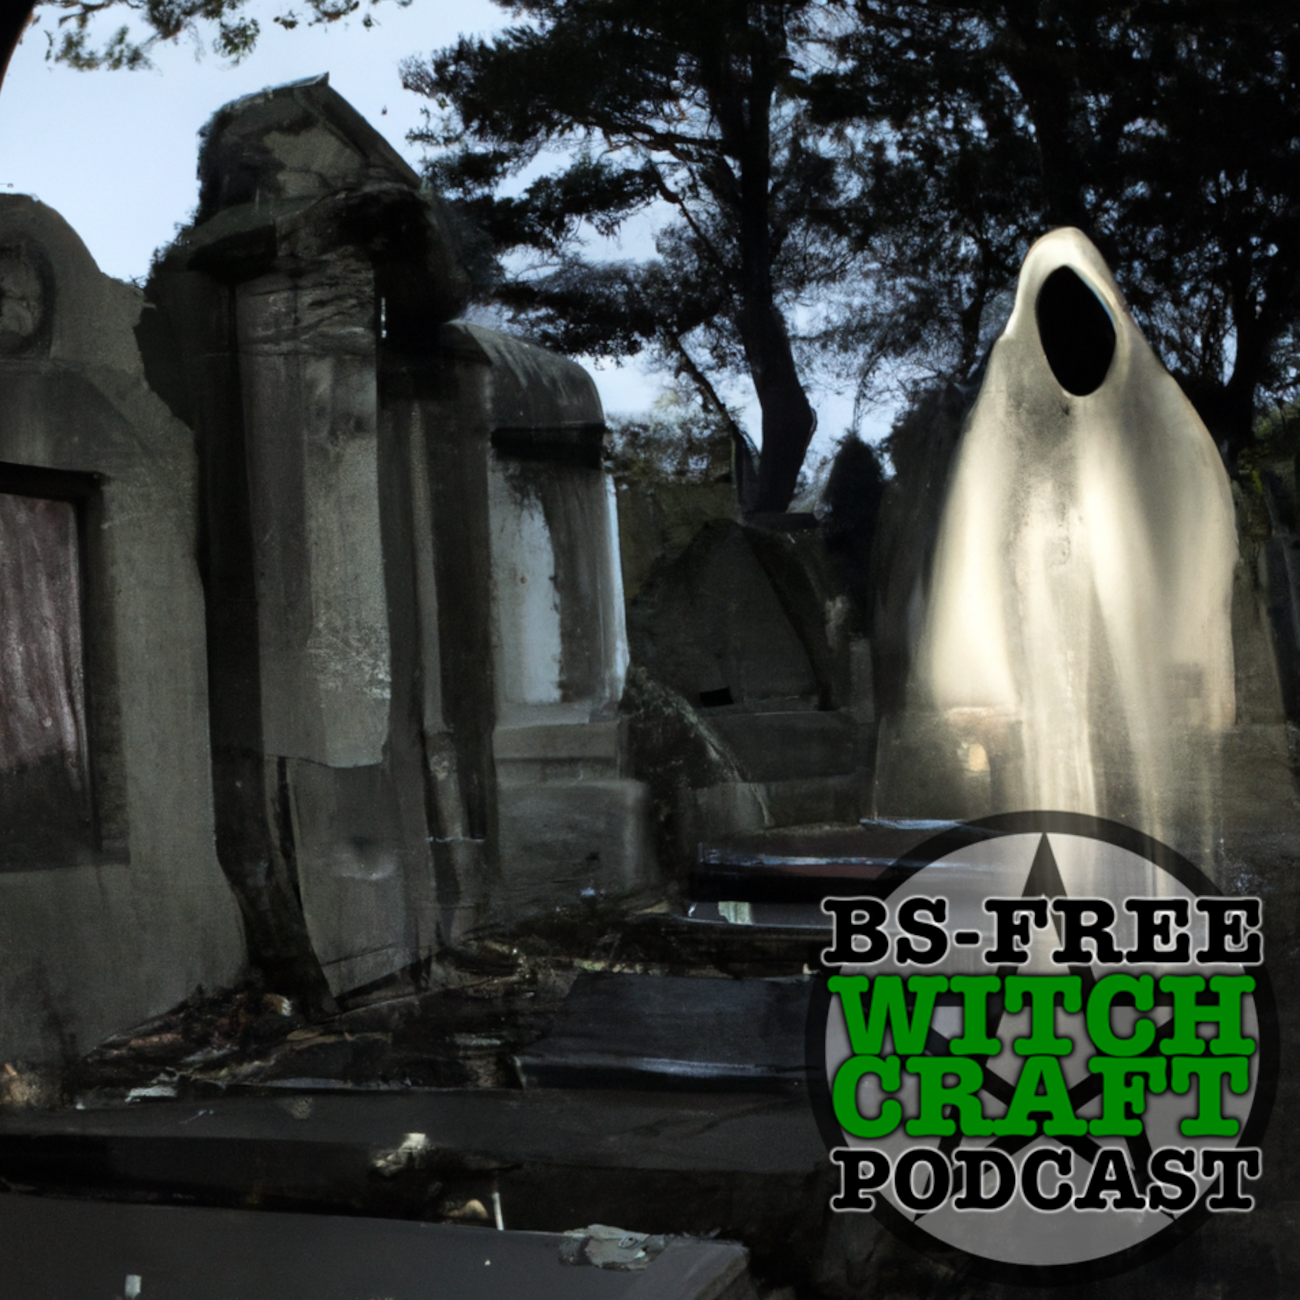 52. Another Spooky Episode